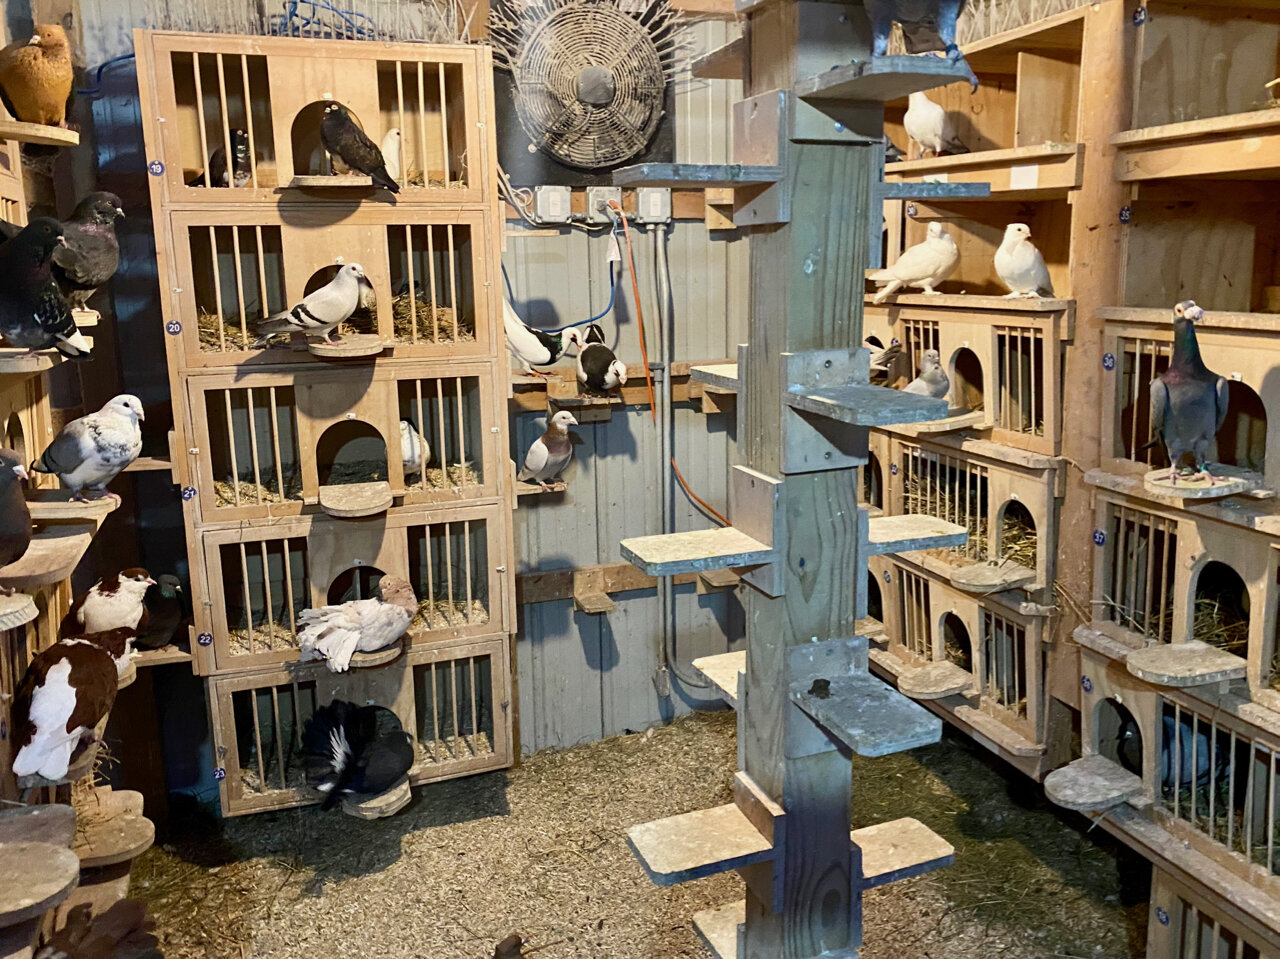  A huge variety of pigeon breeds at the Nye/Brown property. Charles Darwin used domesticated pigeon breeds as examples of how artificial selection can rapidly change the appearance of pigeons. All of the diverse breeds of pigeon were developed from t